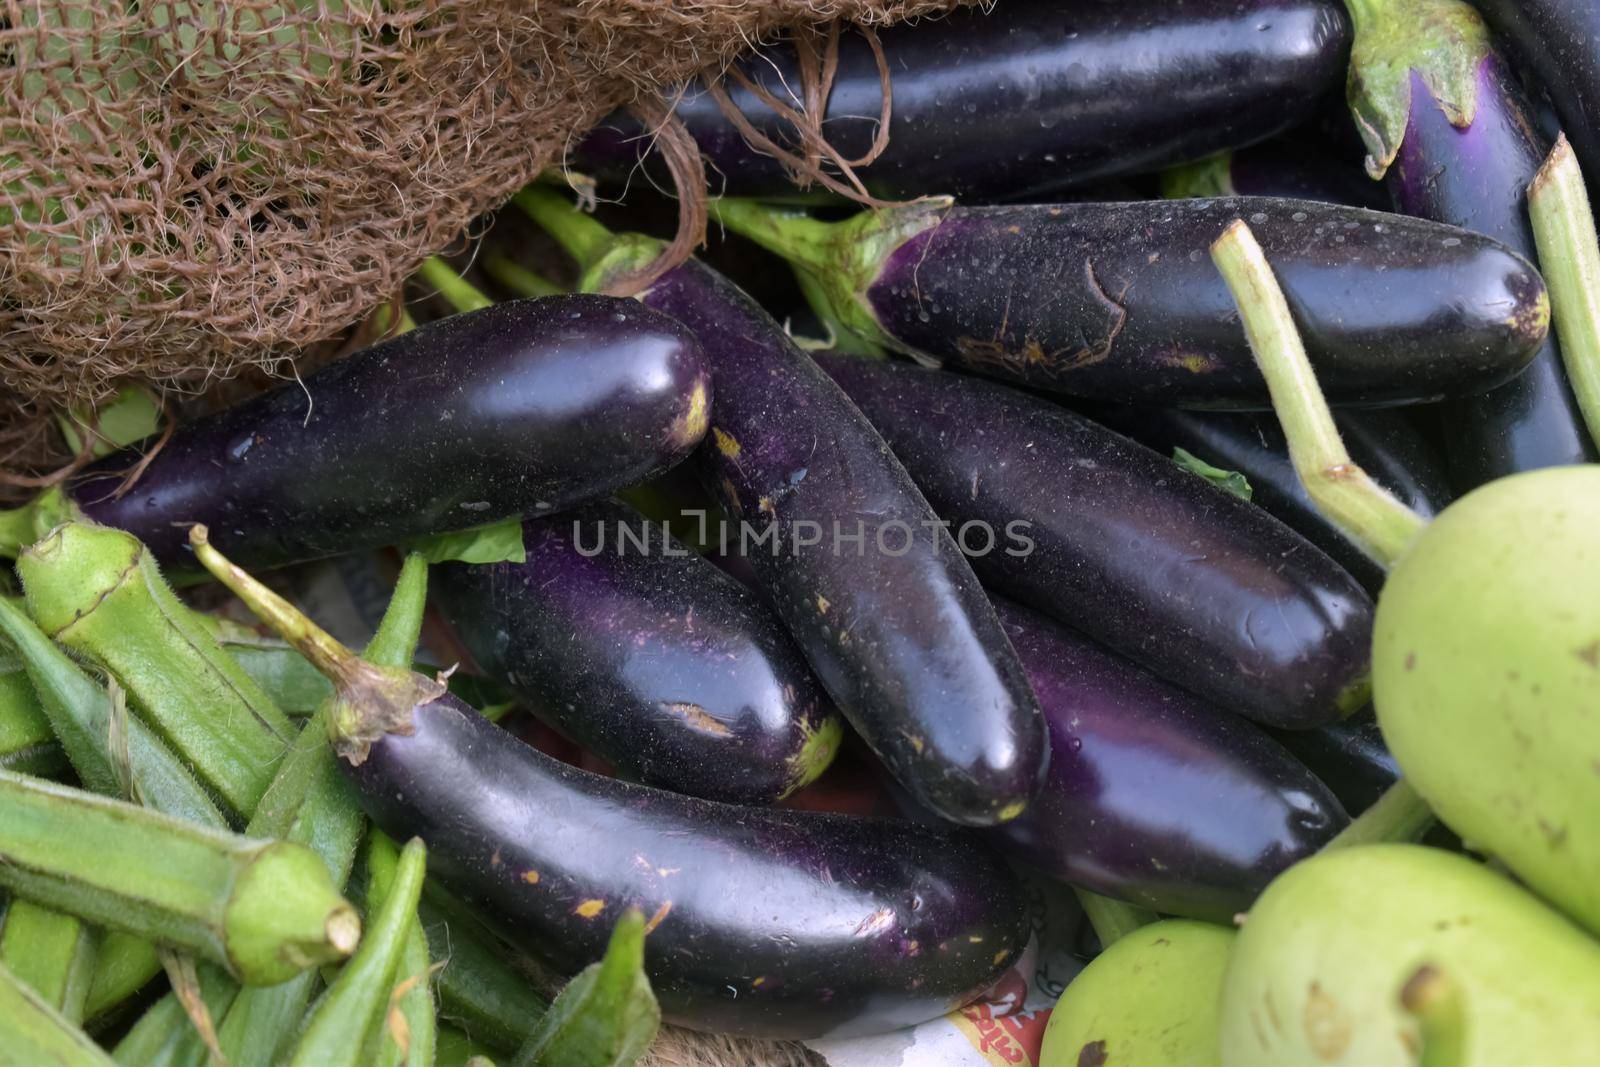 Closeup shot of a pile of fresh eggplants in a market place by tabishere